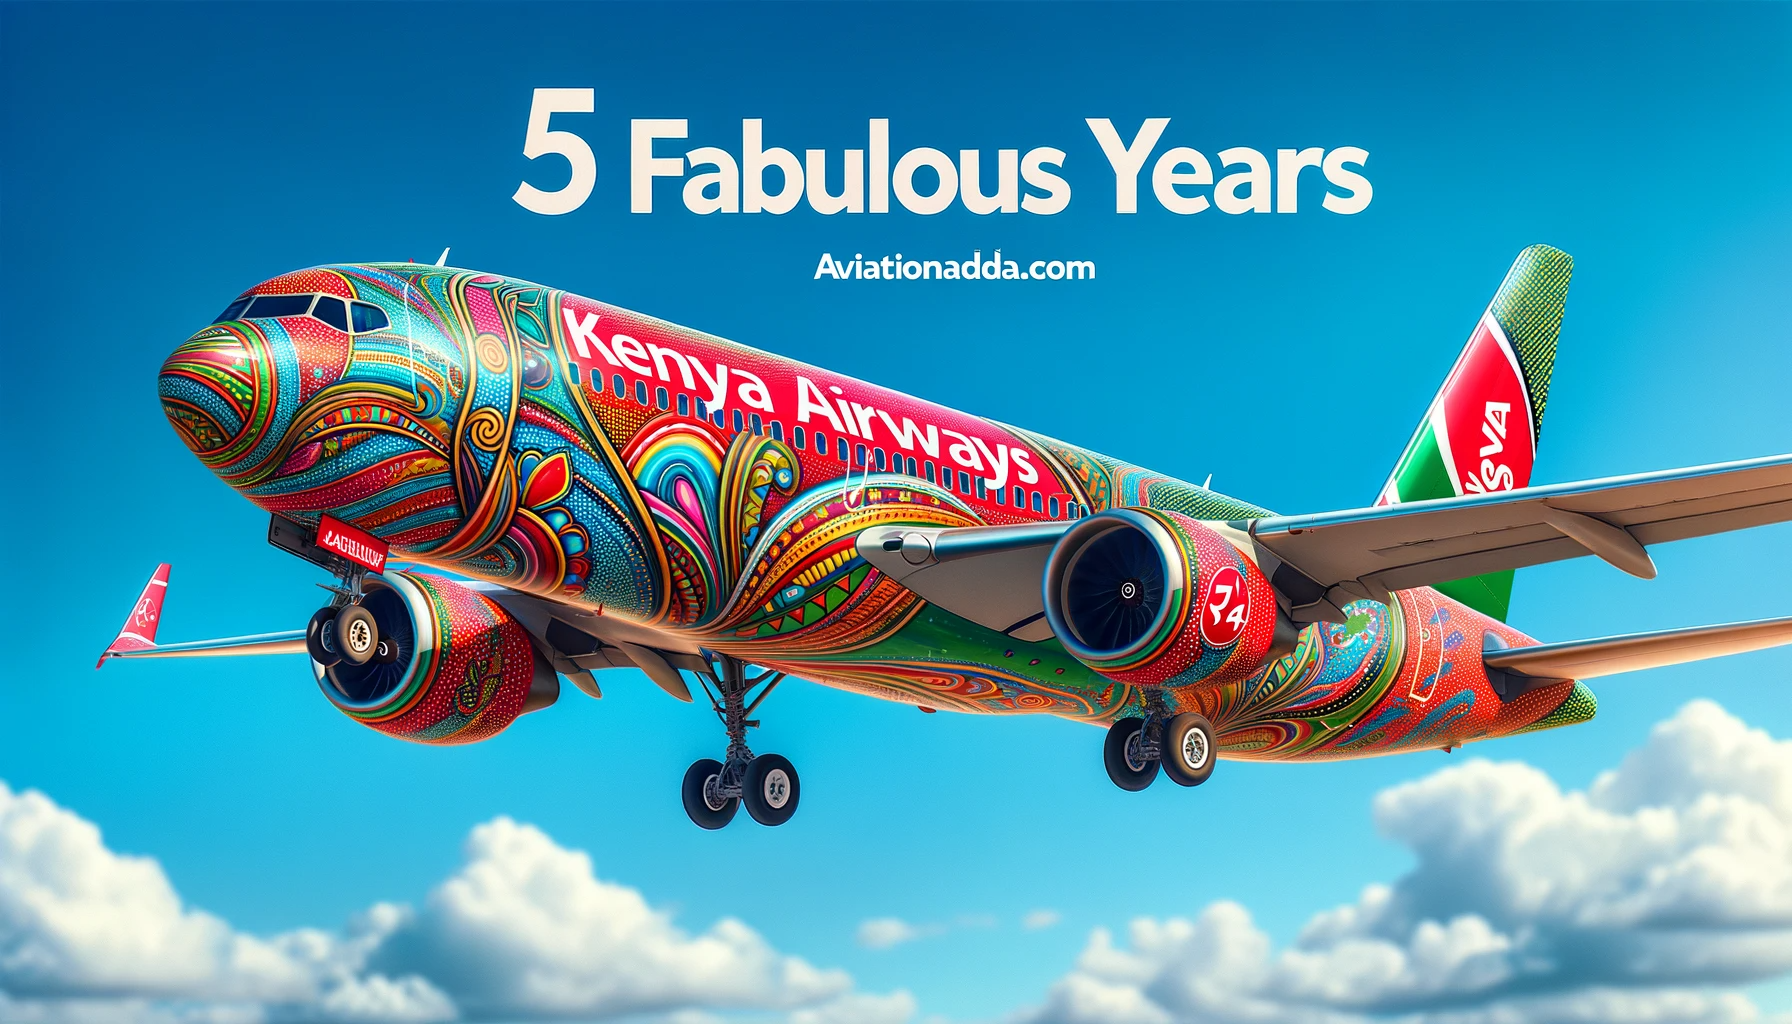 Photo of a Kenya Airways aircraft adorned with vibrant colors and designs, symbolizing a celebration of their 5th anniversary.